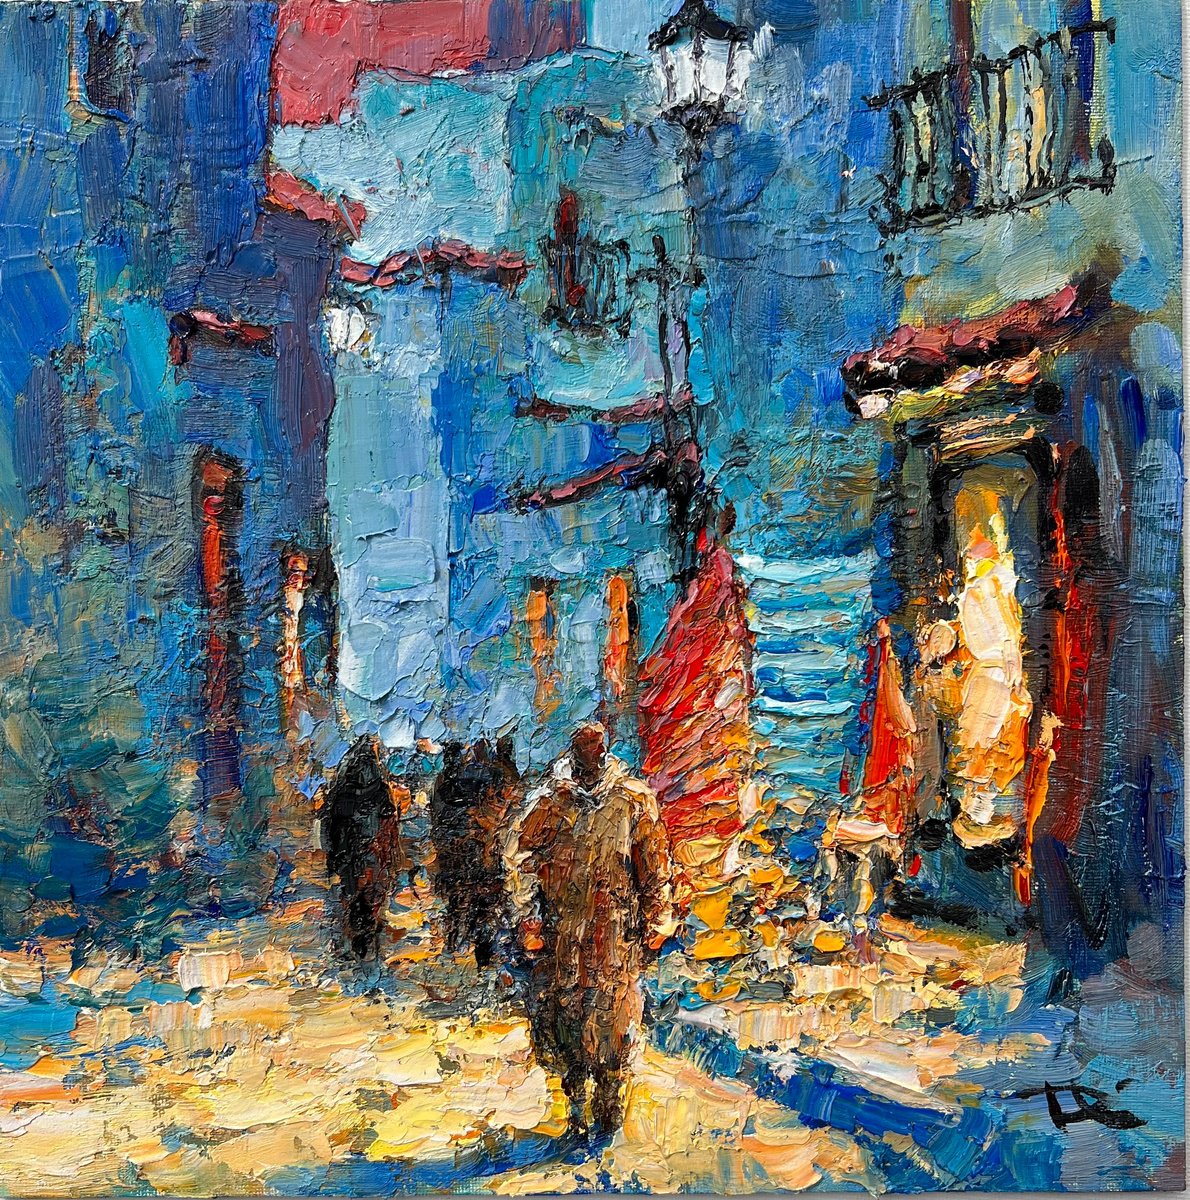 Morocco Series - Blue Village by Dong Lin Zhang